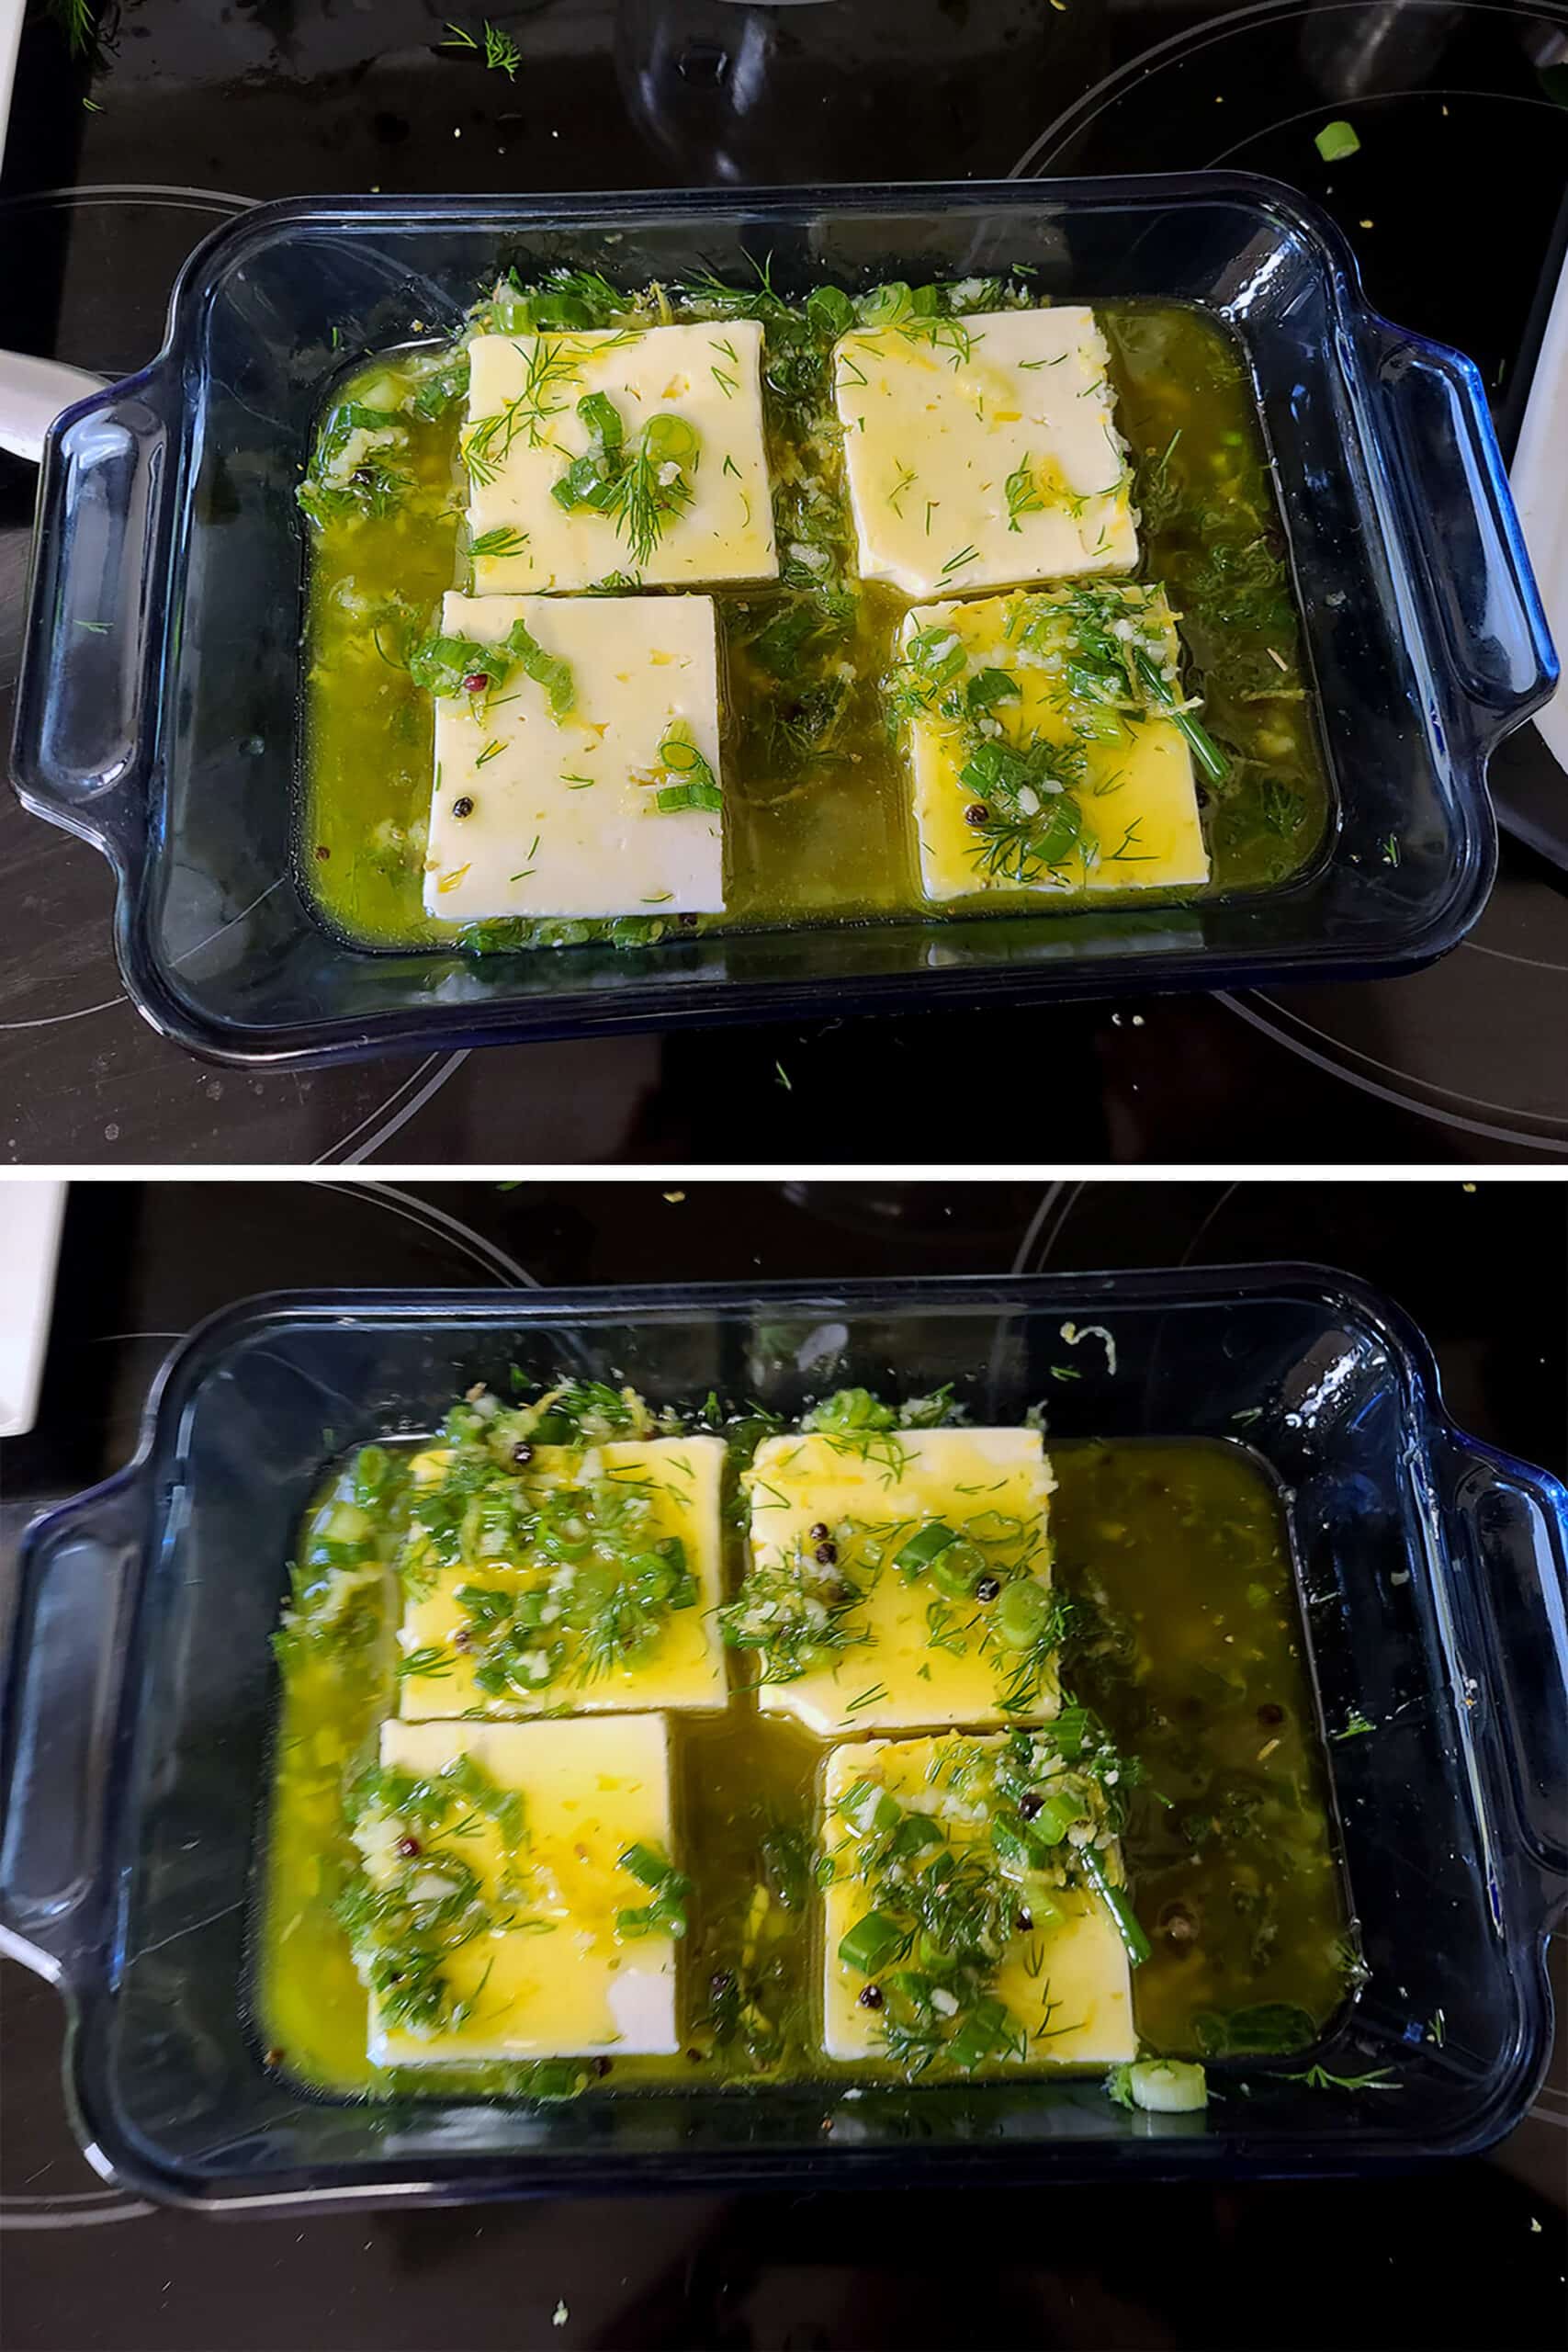 A 2 part image showing square slabs of feta in the marinade.